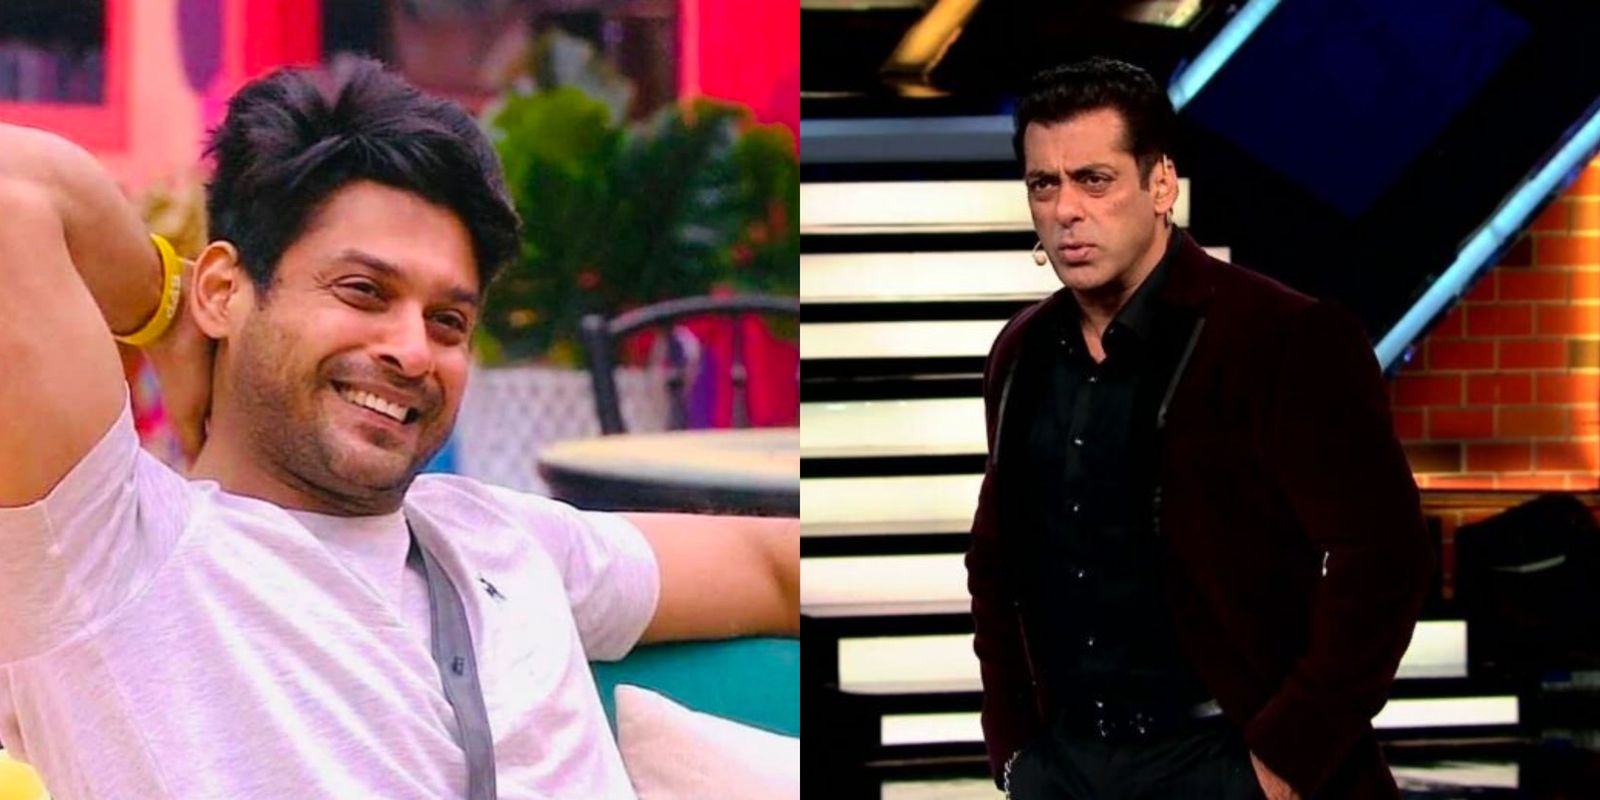 Bigg Boss 13: Salman Khan Scolds Siddharth Shukla, Makers Of The Show Stop Him From Doing So Mid-Way?